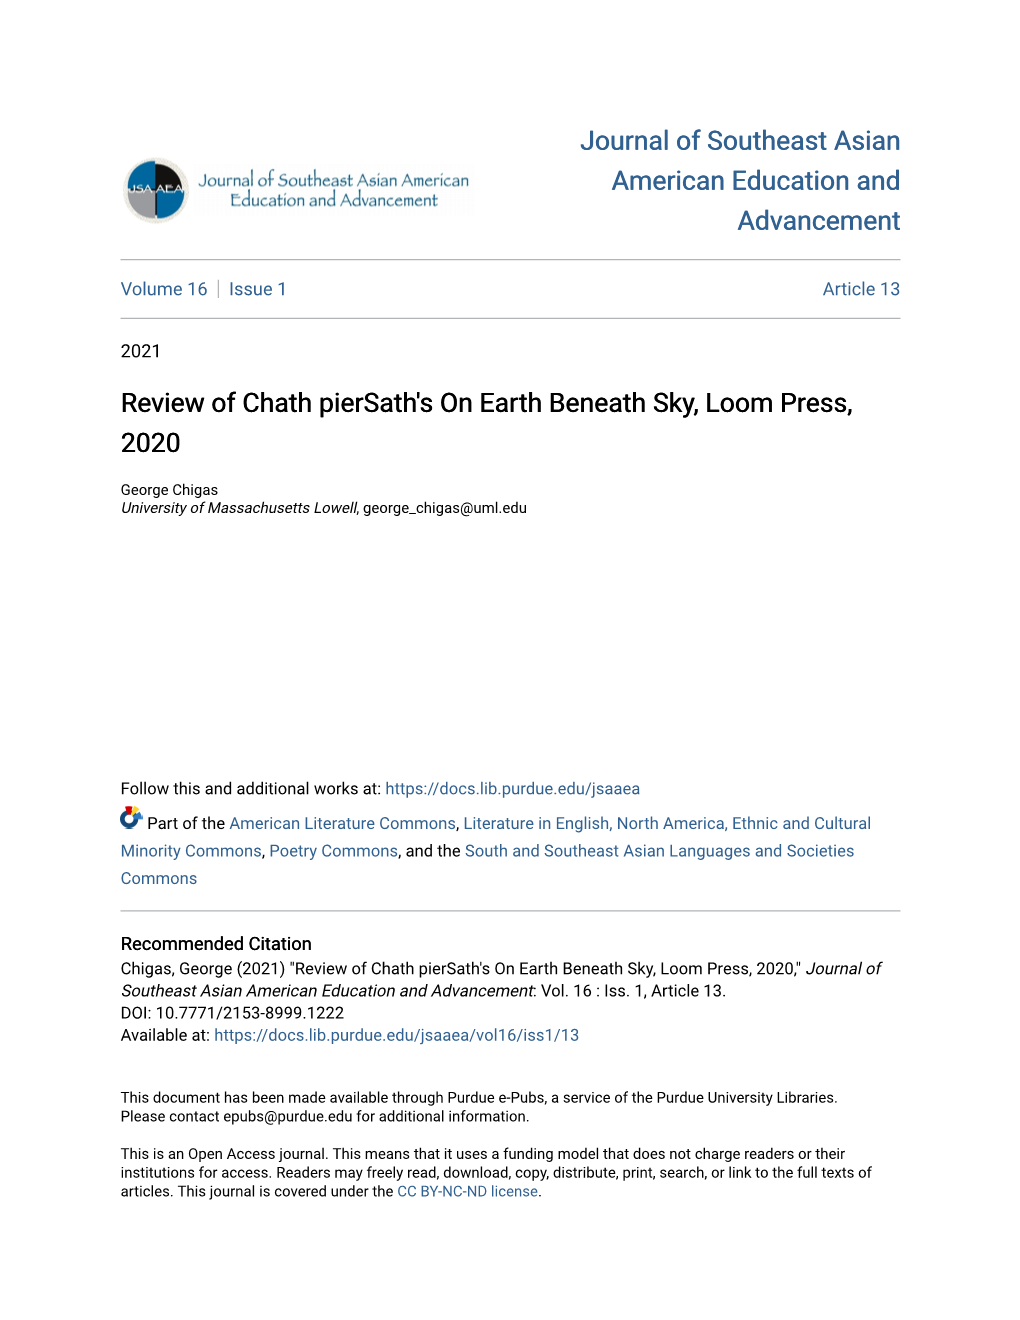 Review of Chath Piersath's on Earth Beneath Sky, Loom Press, 2020